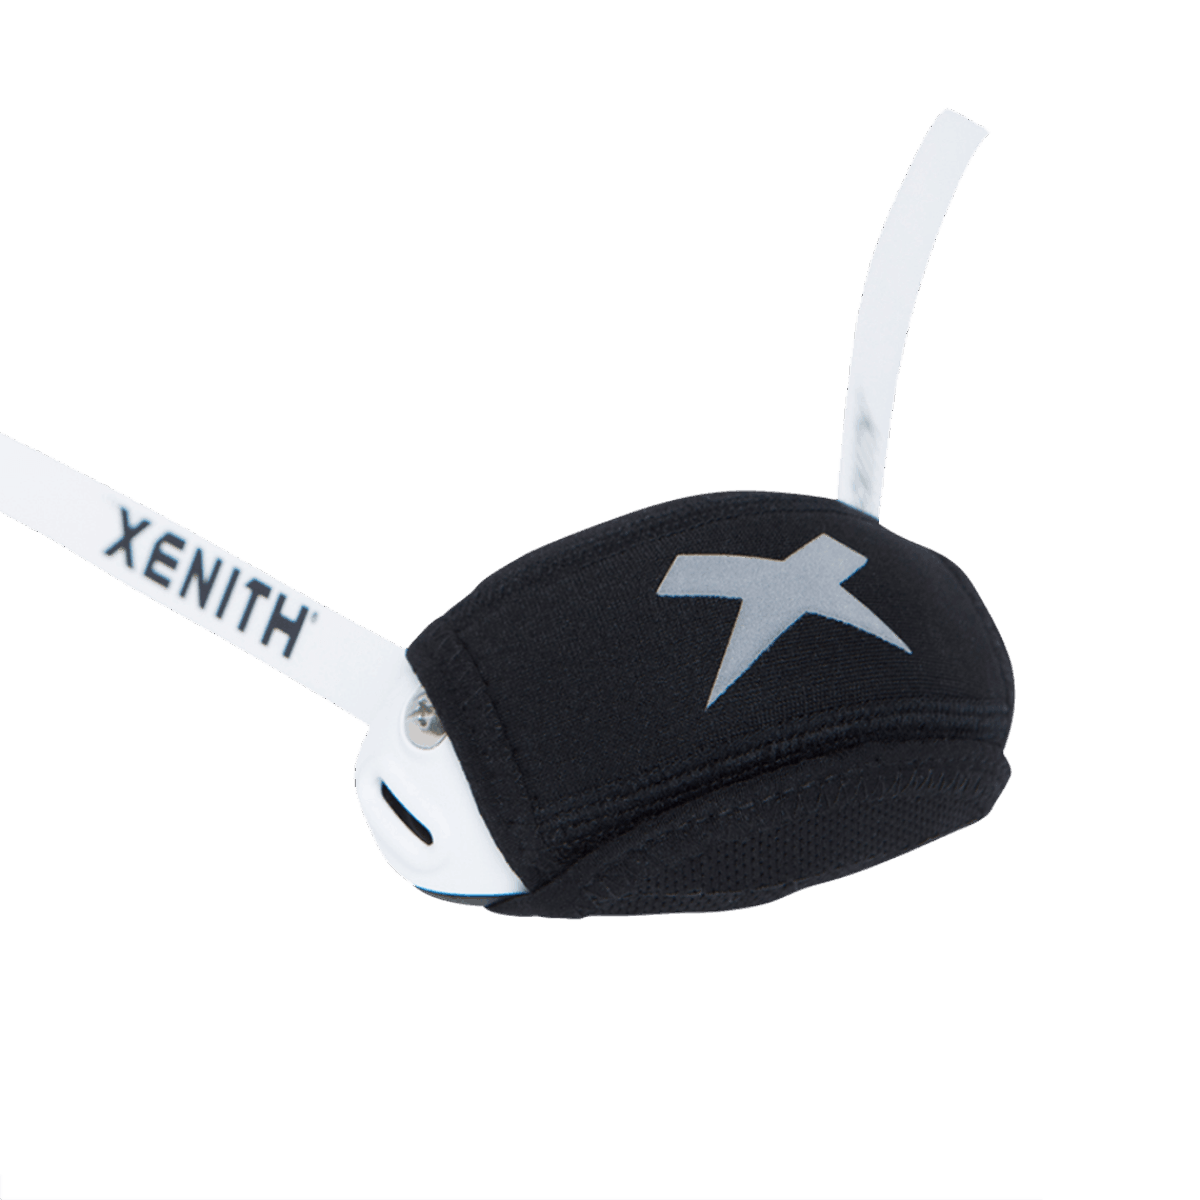 Black chin cup sleeve with white Xenith-X logo from front.